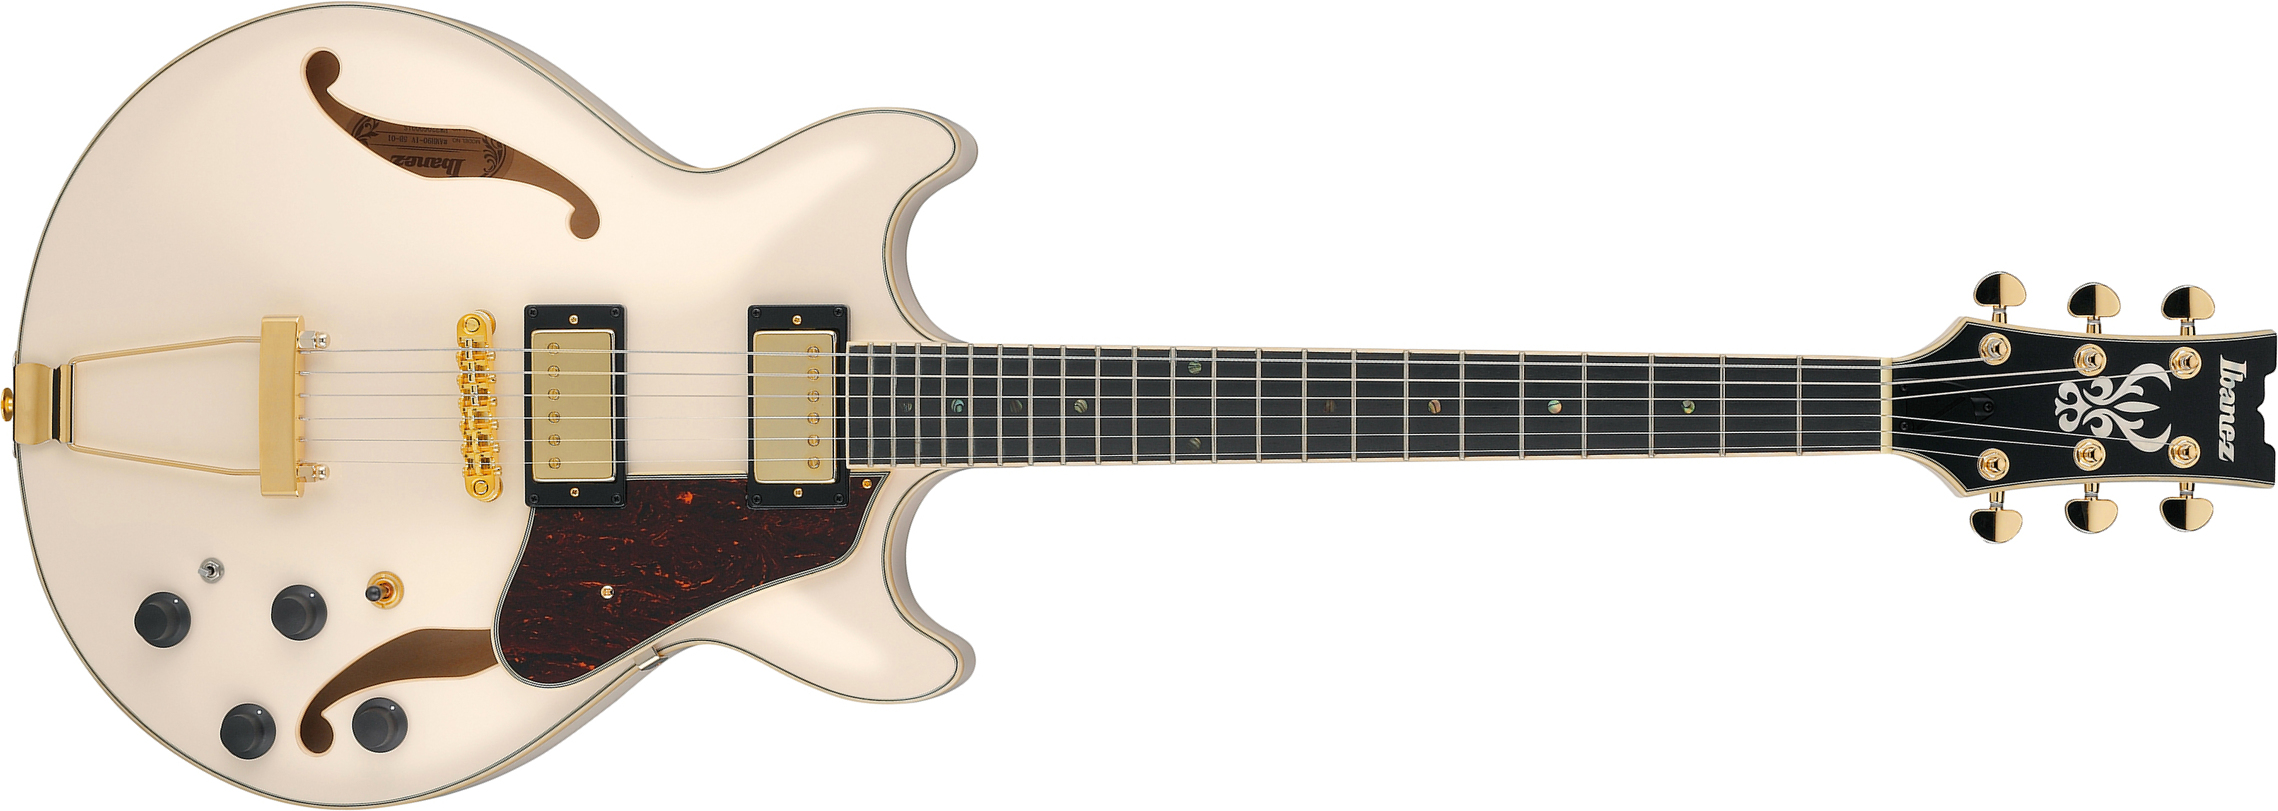 Ibanez Amh90 Iv Artcore Expressionist 2h Ht Eb - Ivory - Hollow-body electric guitar - Main picture